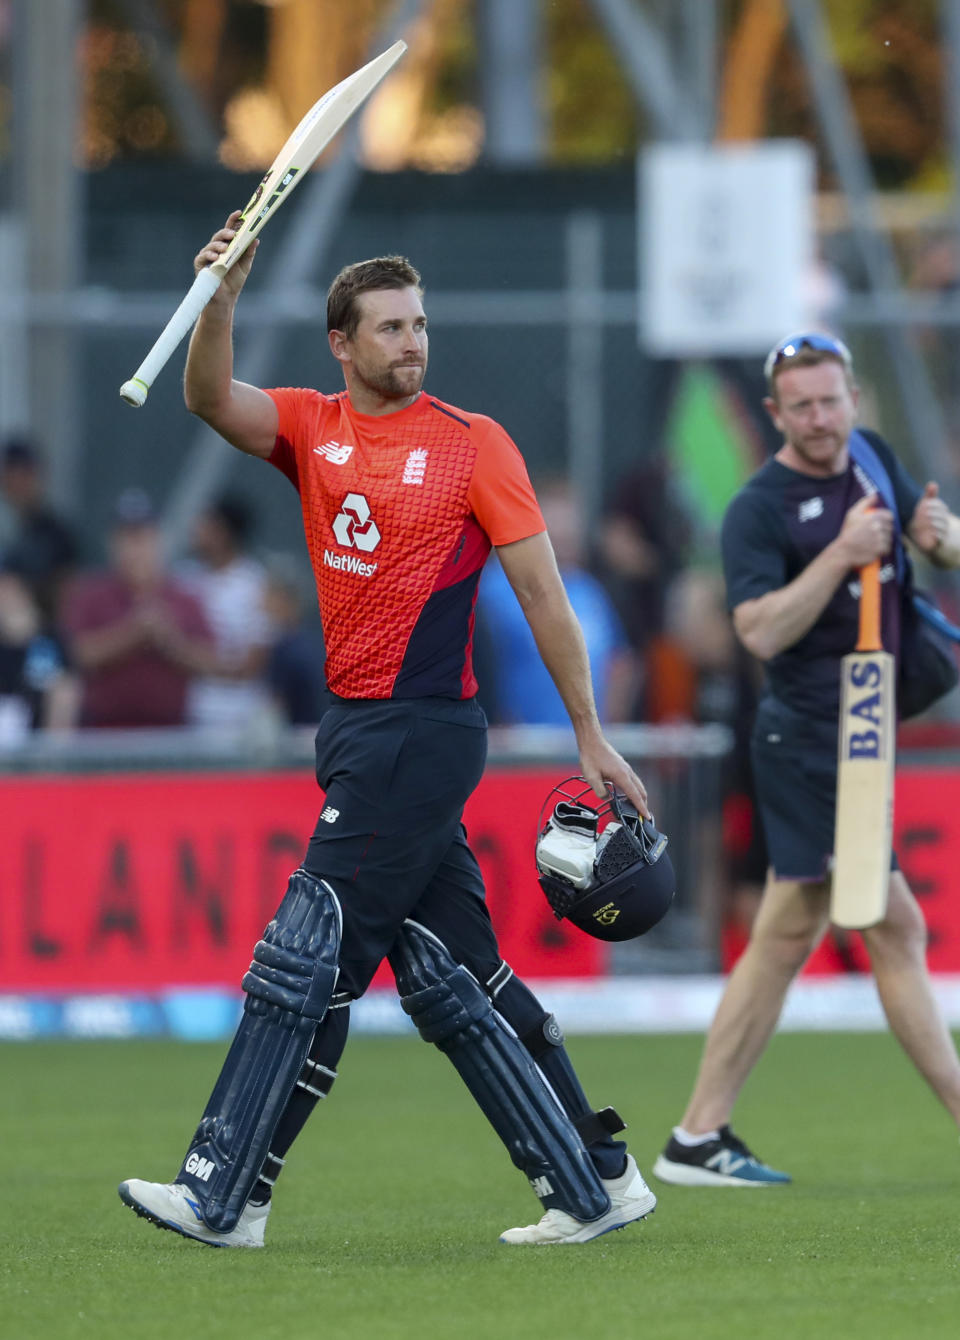 England's David Milan acknowledges the crowd after hitting 103 not out during the T20 cricket match between England and New Zealand in Napier, New Zealand, Friday, Nov. 8, 2019. (John Cowpland/Photosport via AP)